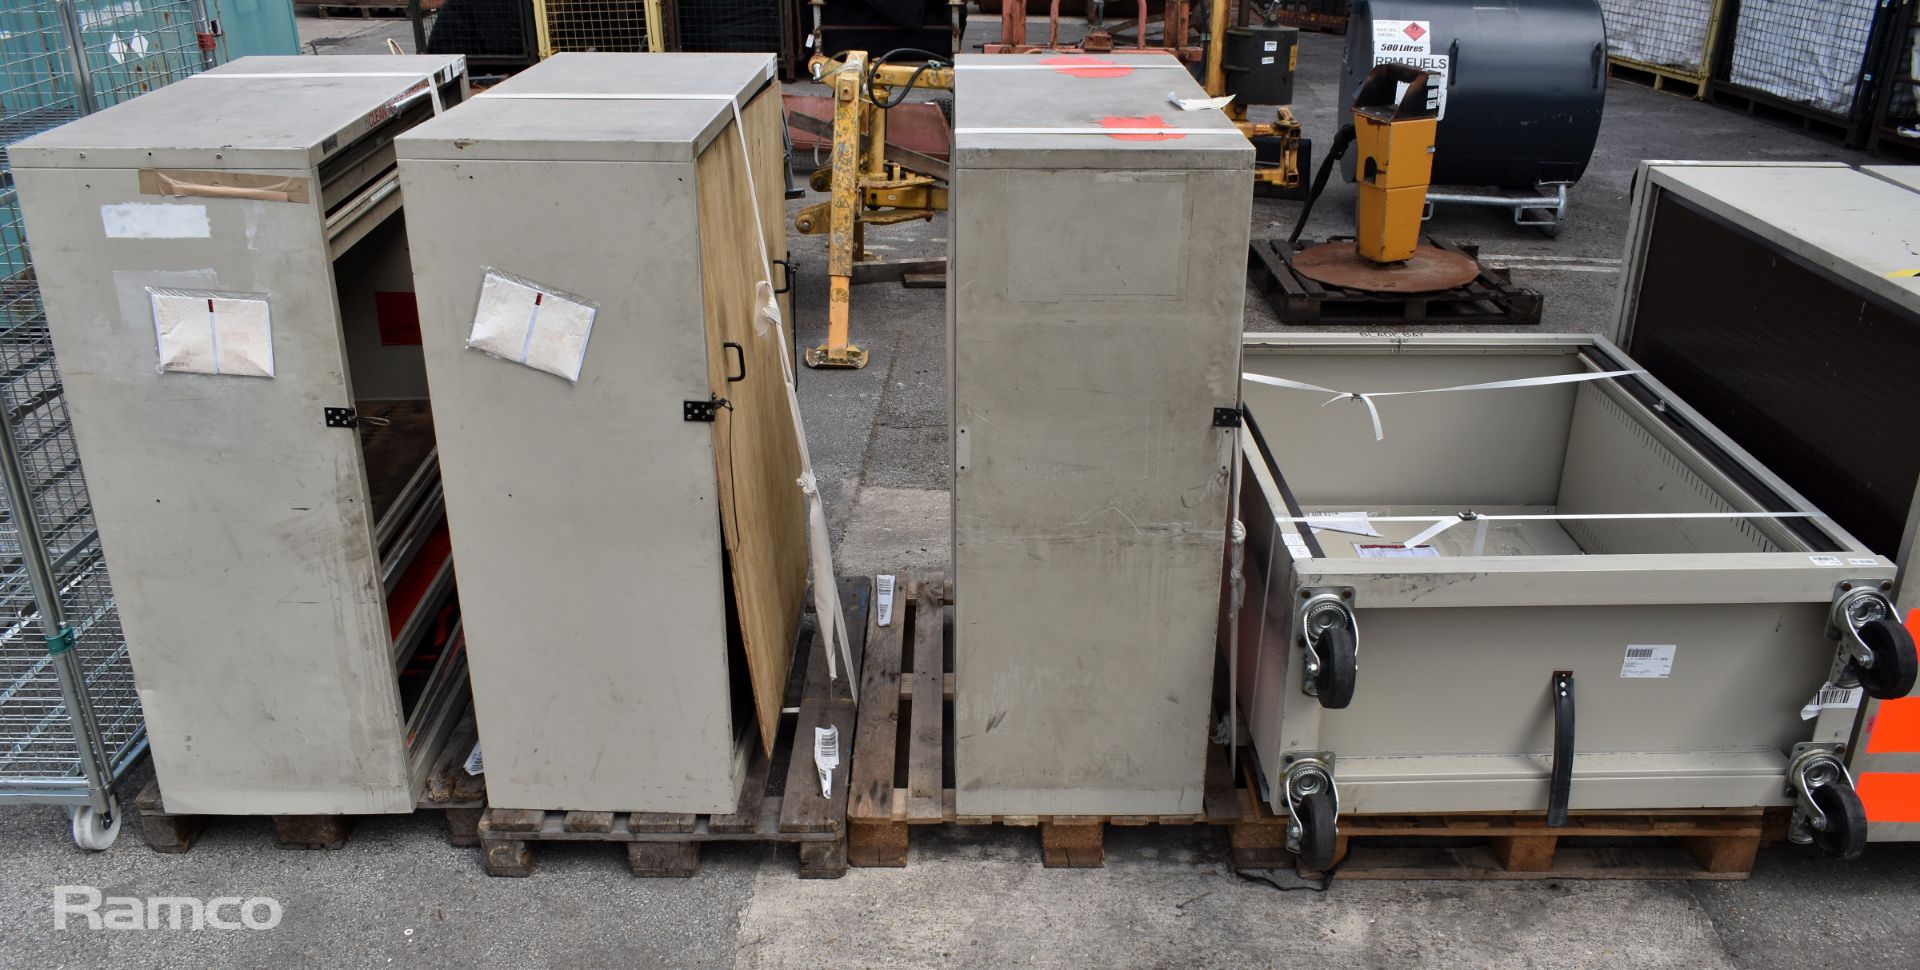 4x Elite mobile maintenance tool cabinet - L 1250 x W 550 x H 1650mm - SPARES OR REPAIRS